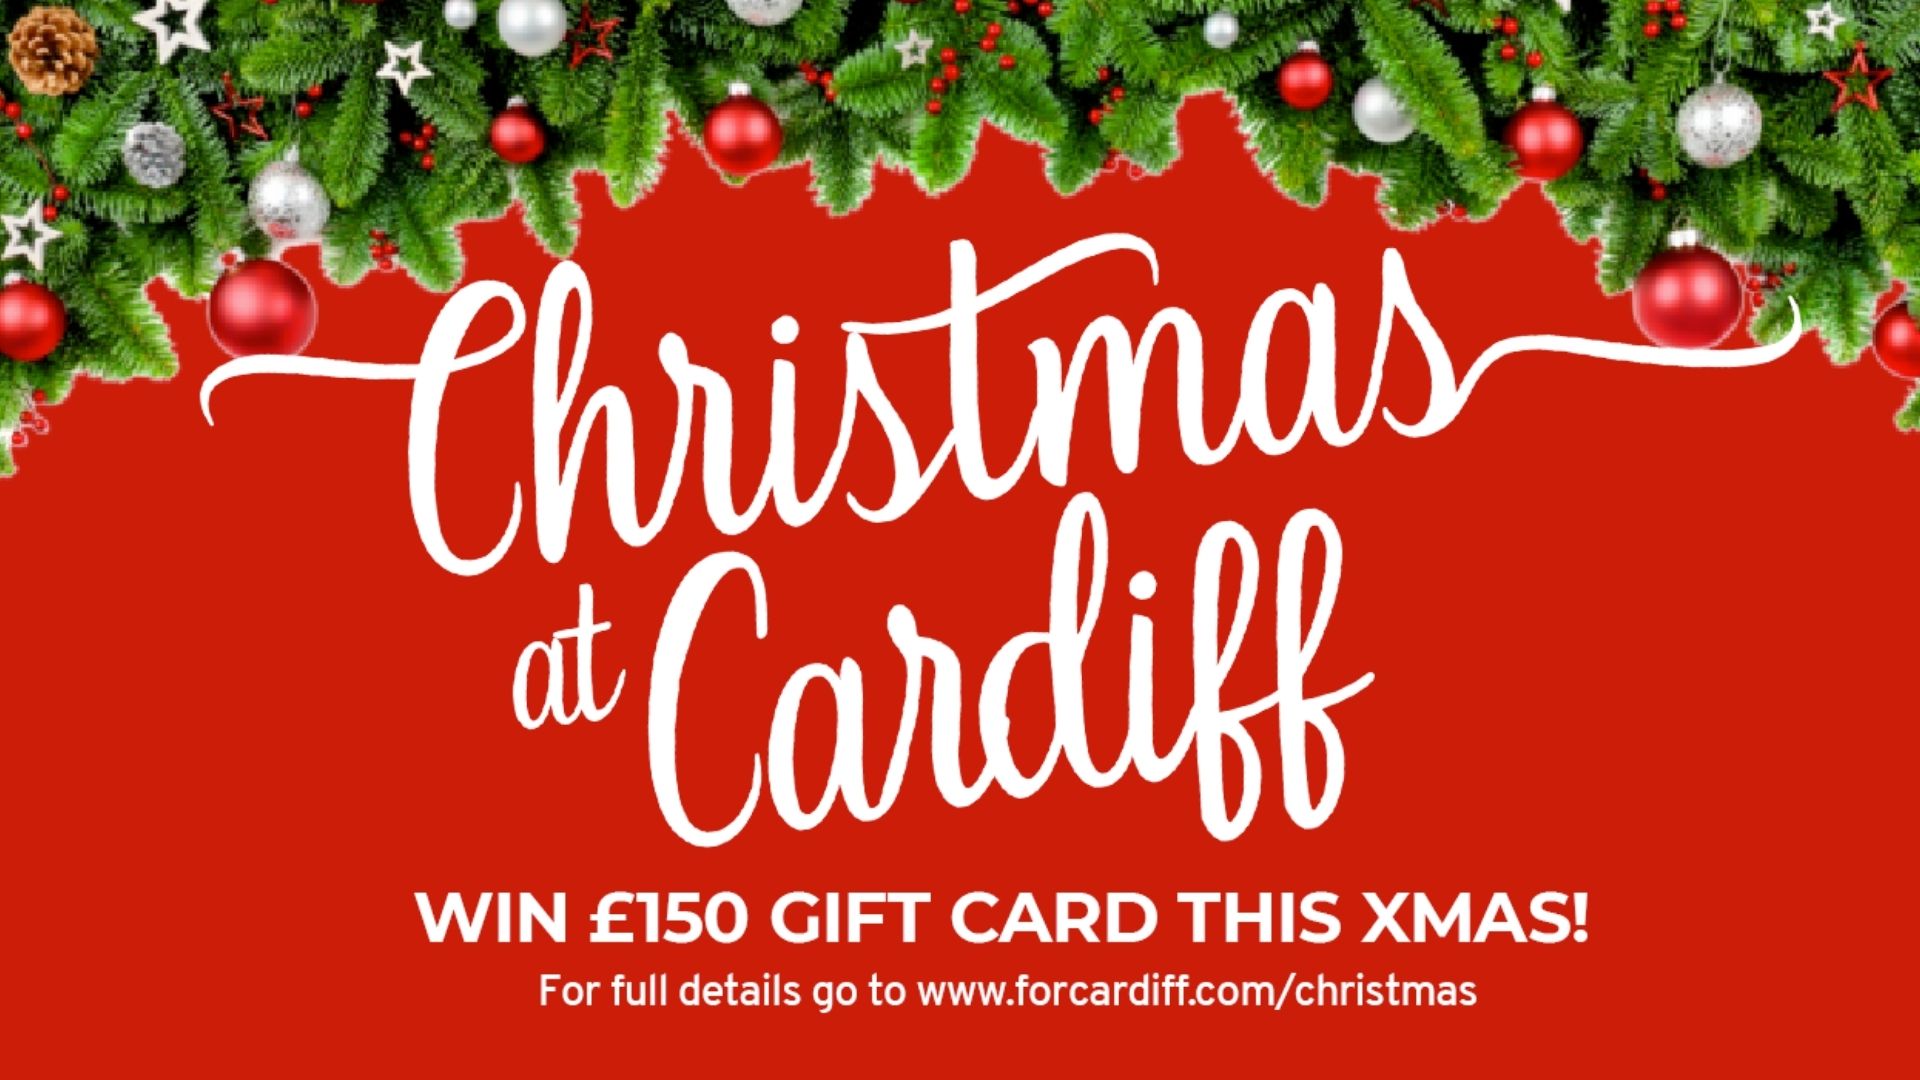 ChristmasAtCardiff campaign image